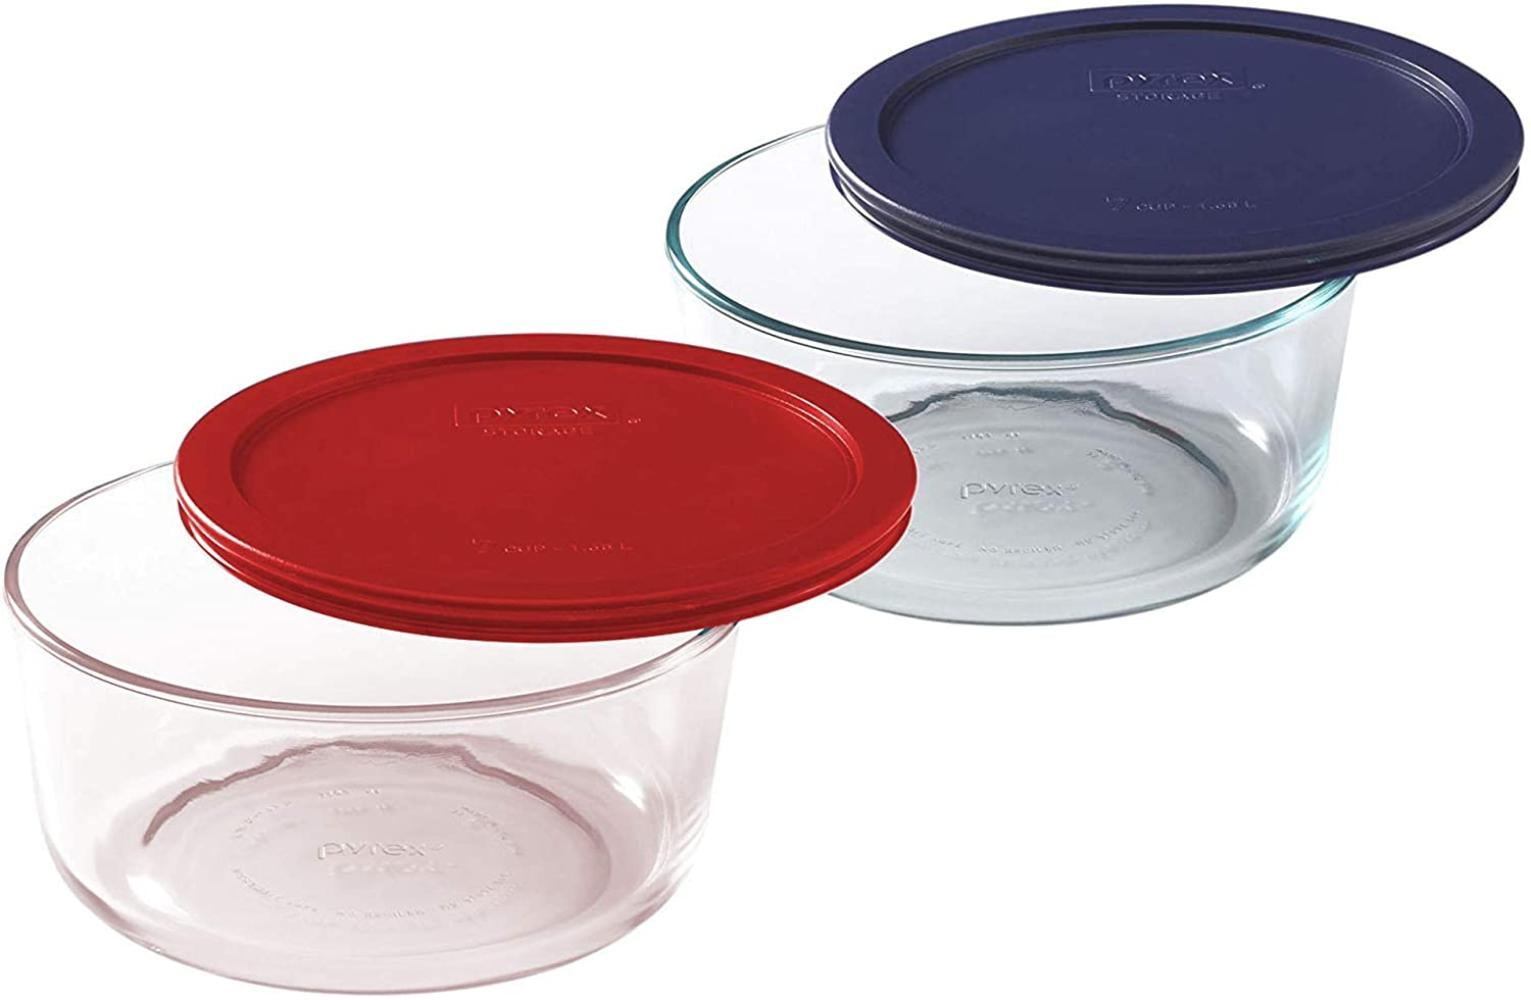 Pyrex Storage Plus 7-Cup Round Storage Dish With Red Plastic Cover Pack Of 2 Con 